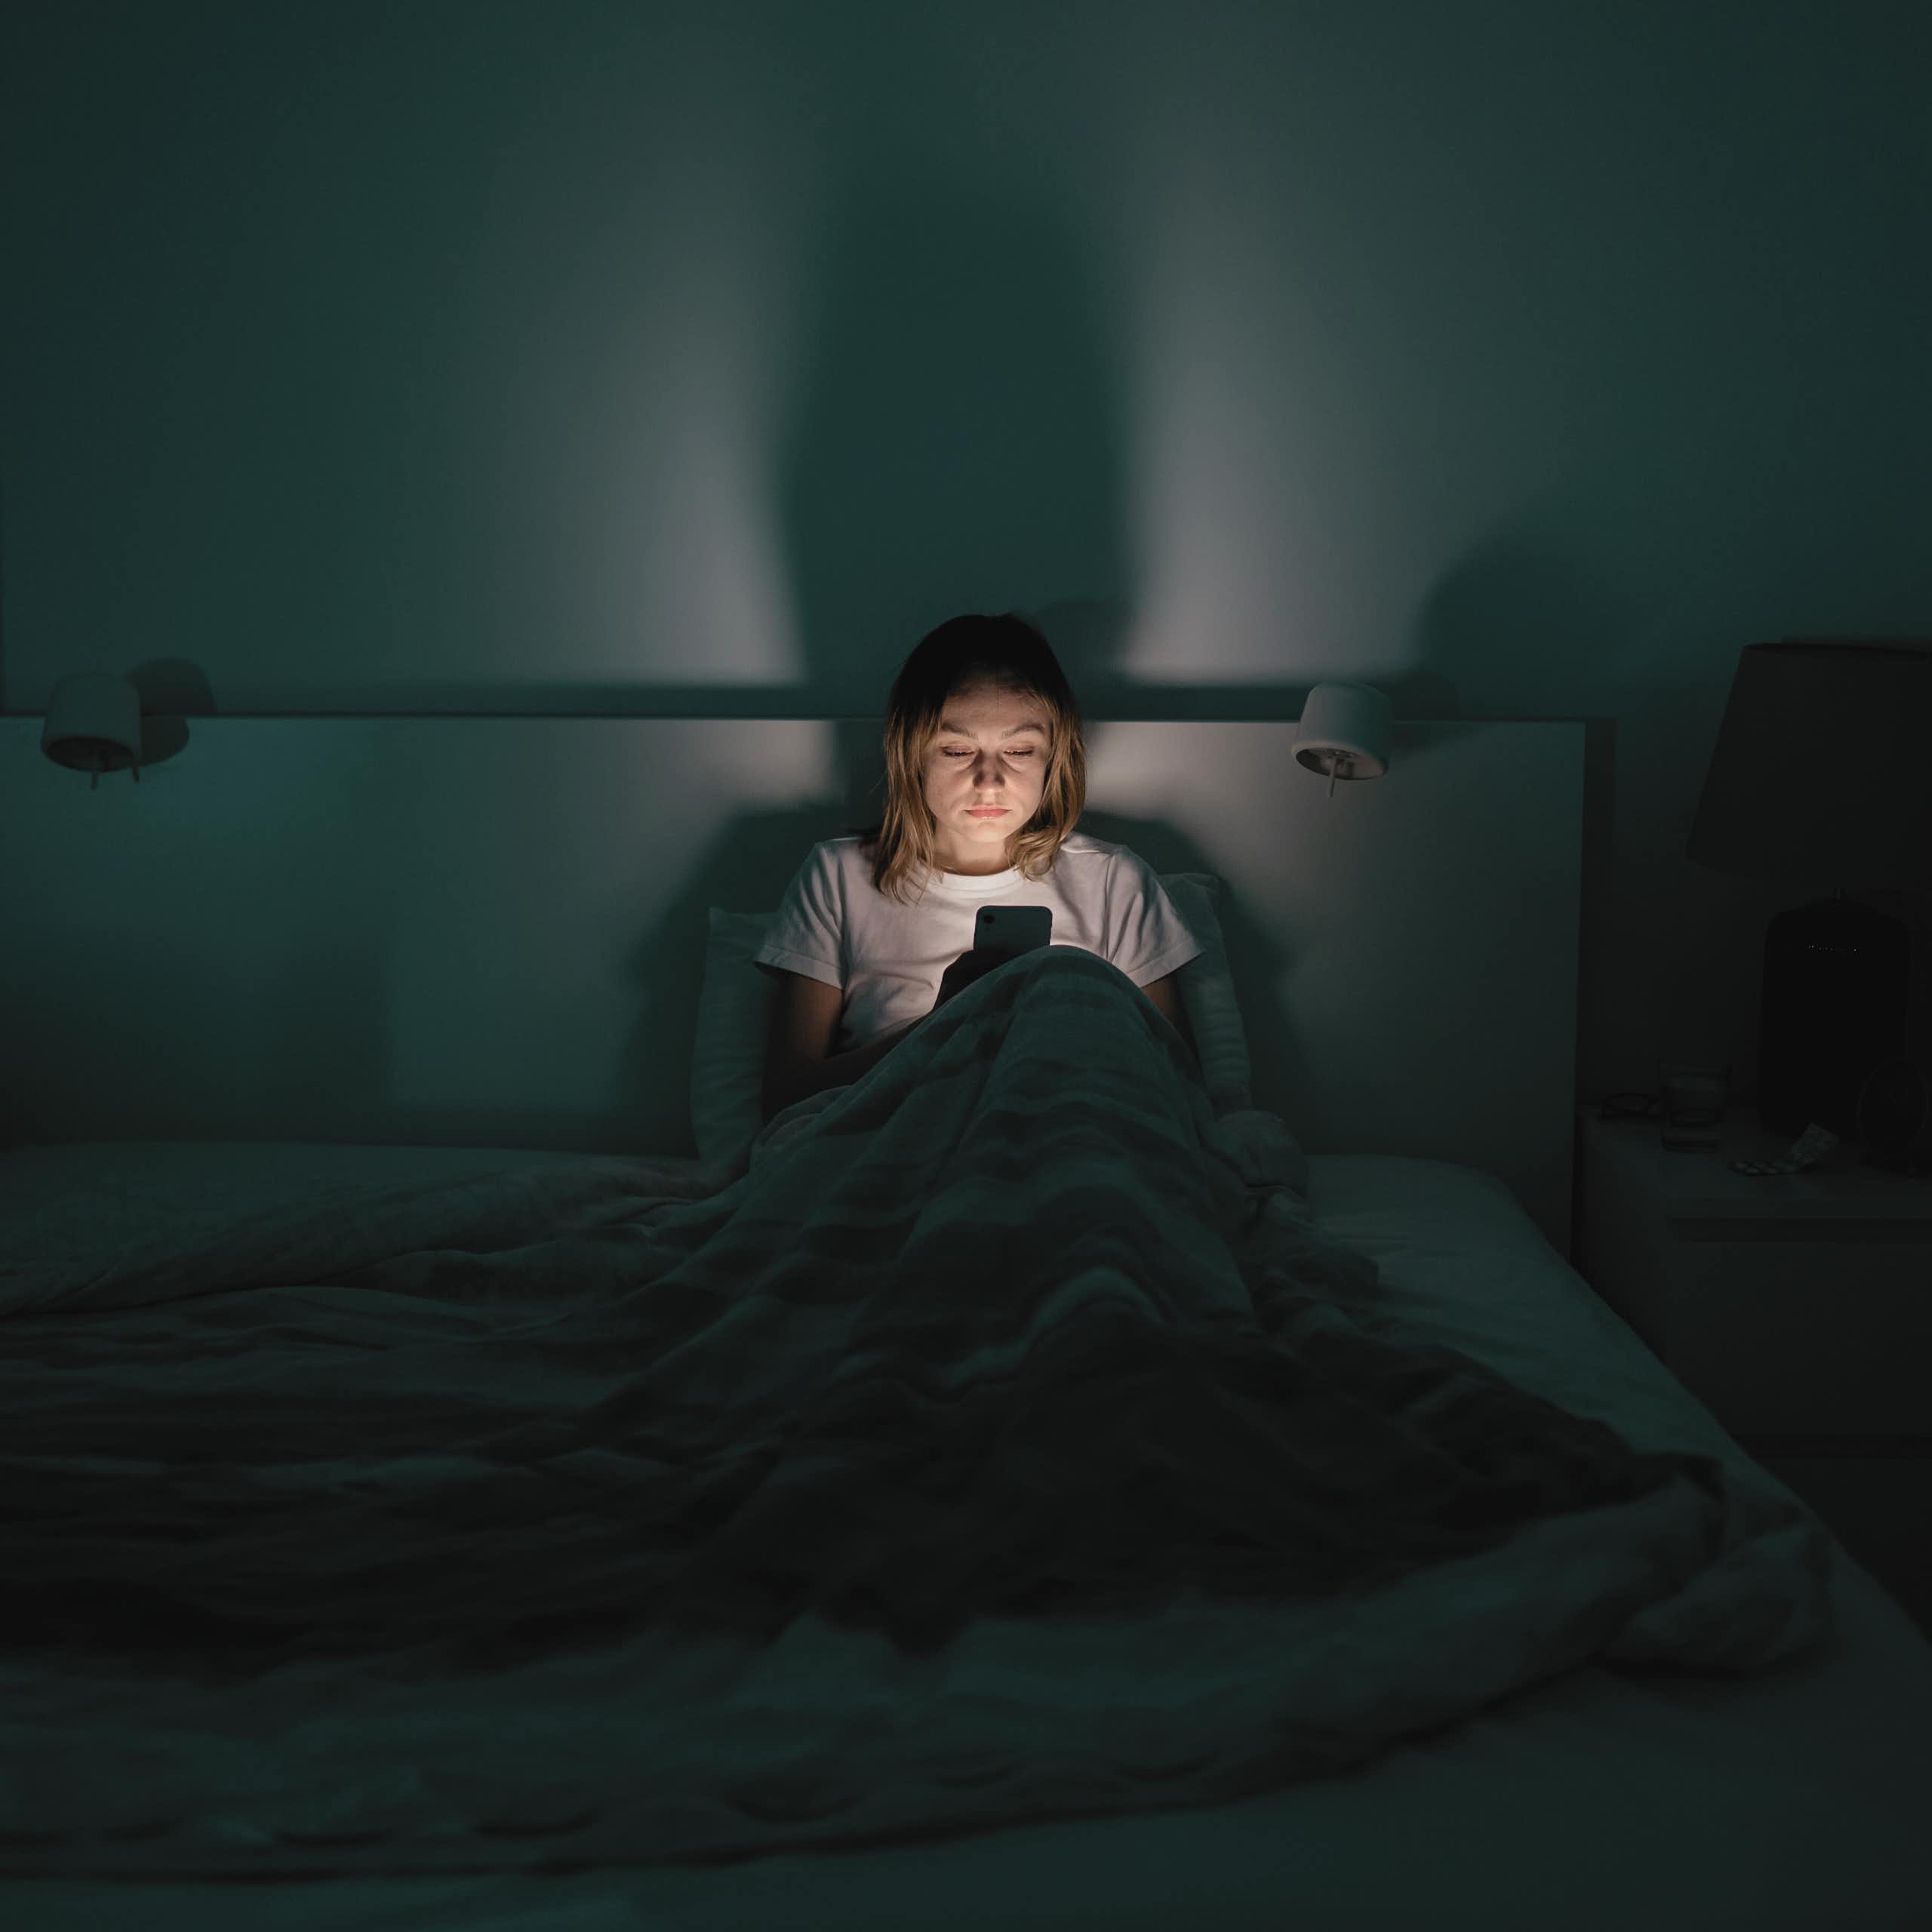 A medium distance view of a tired woman sitting up at night in her bed looking at a smartphone.